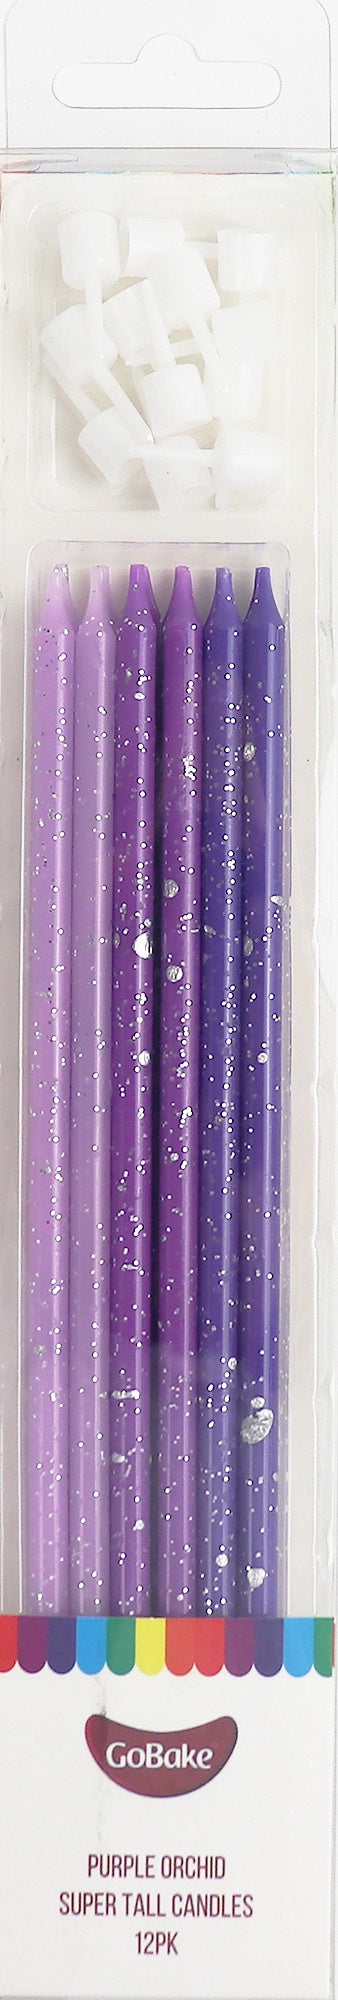 Super Tall GoBake Candles - Ombre Purple Orchid